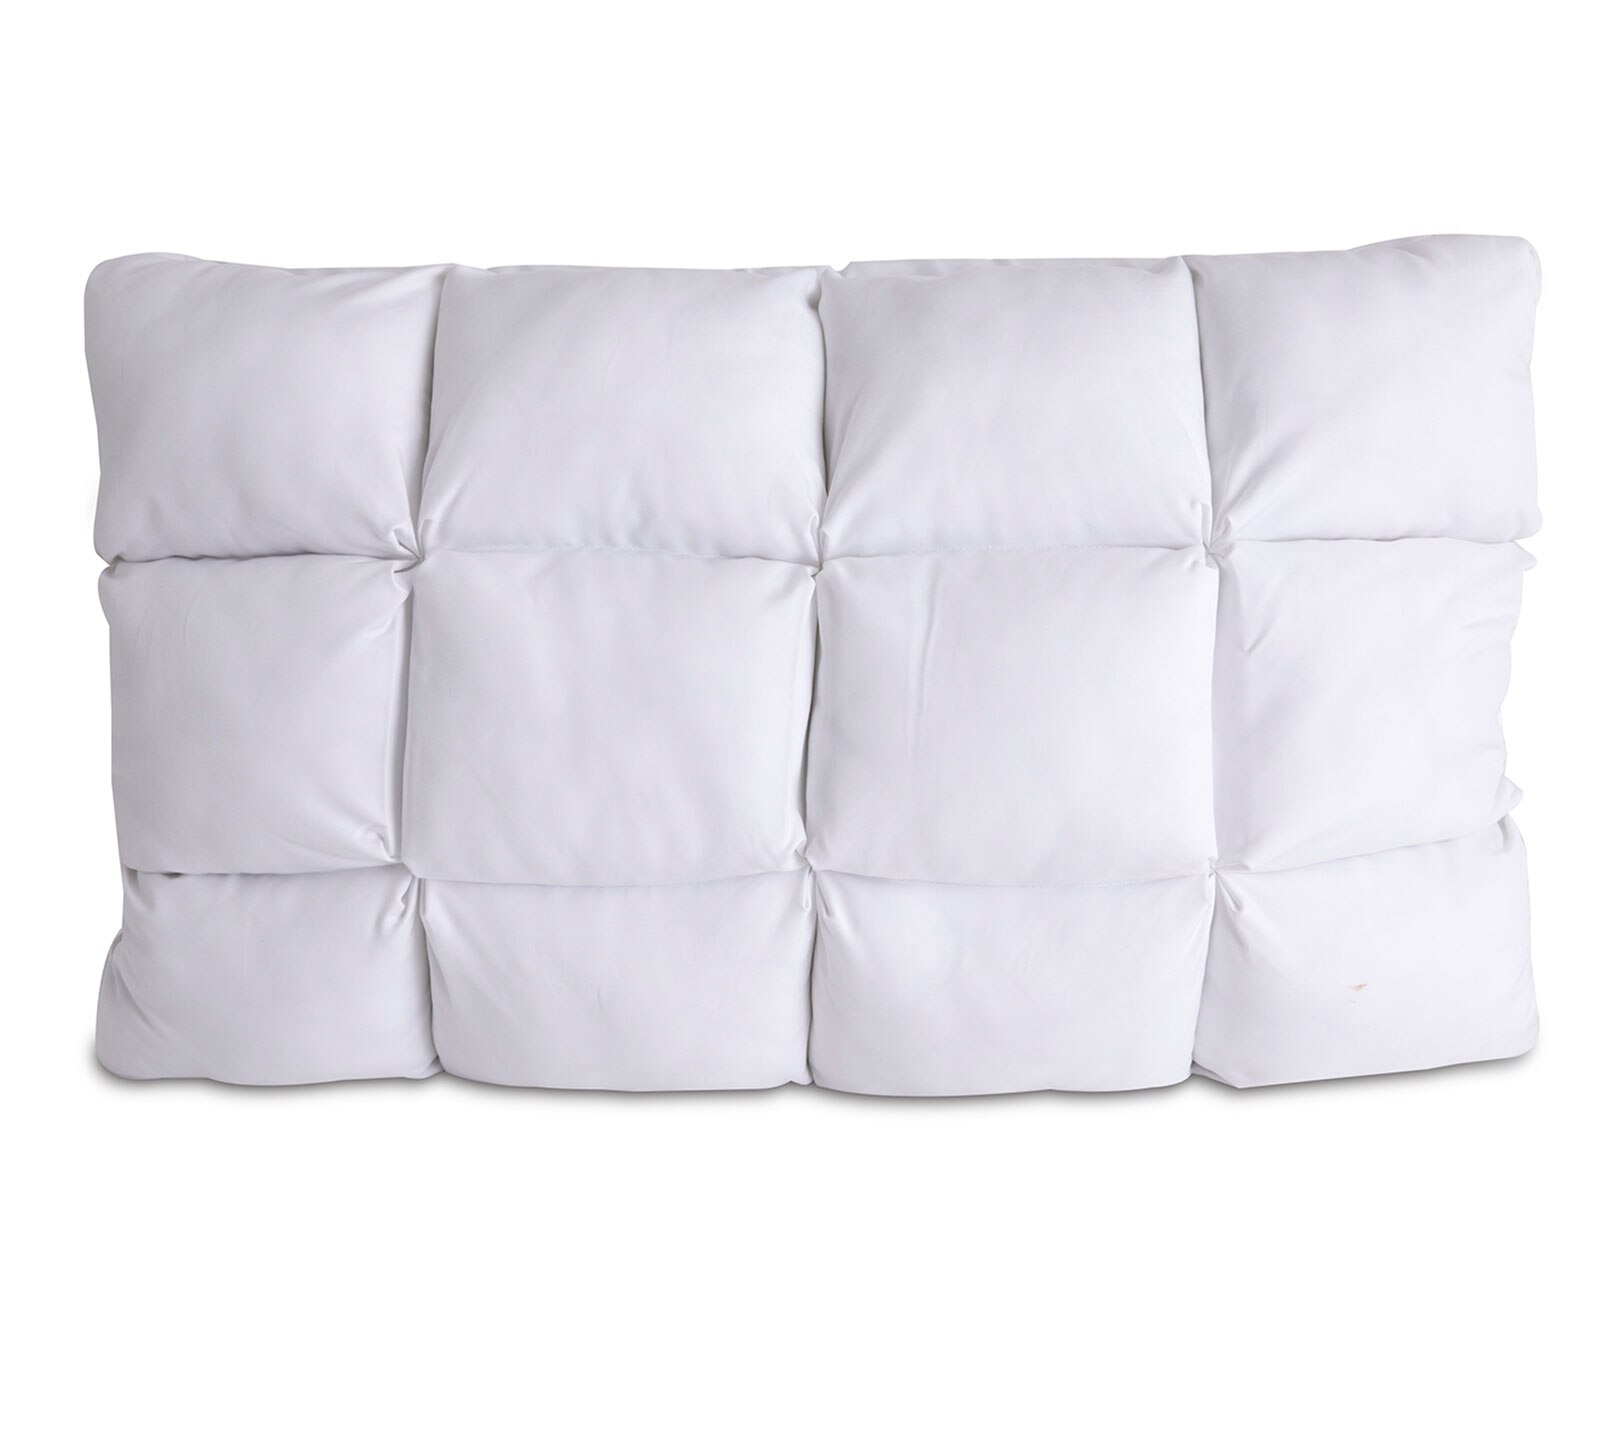 Cooling SoftCell Chill Pillow